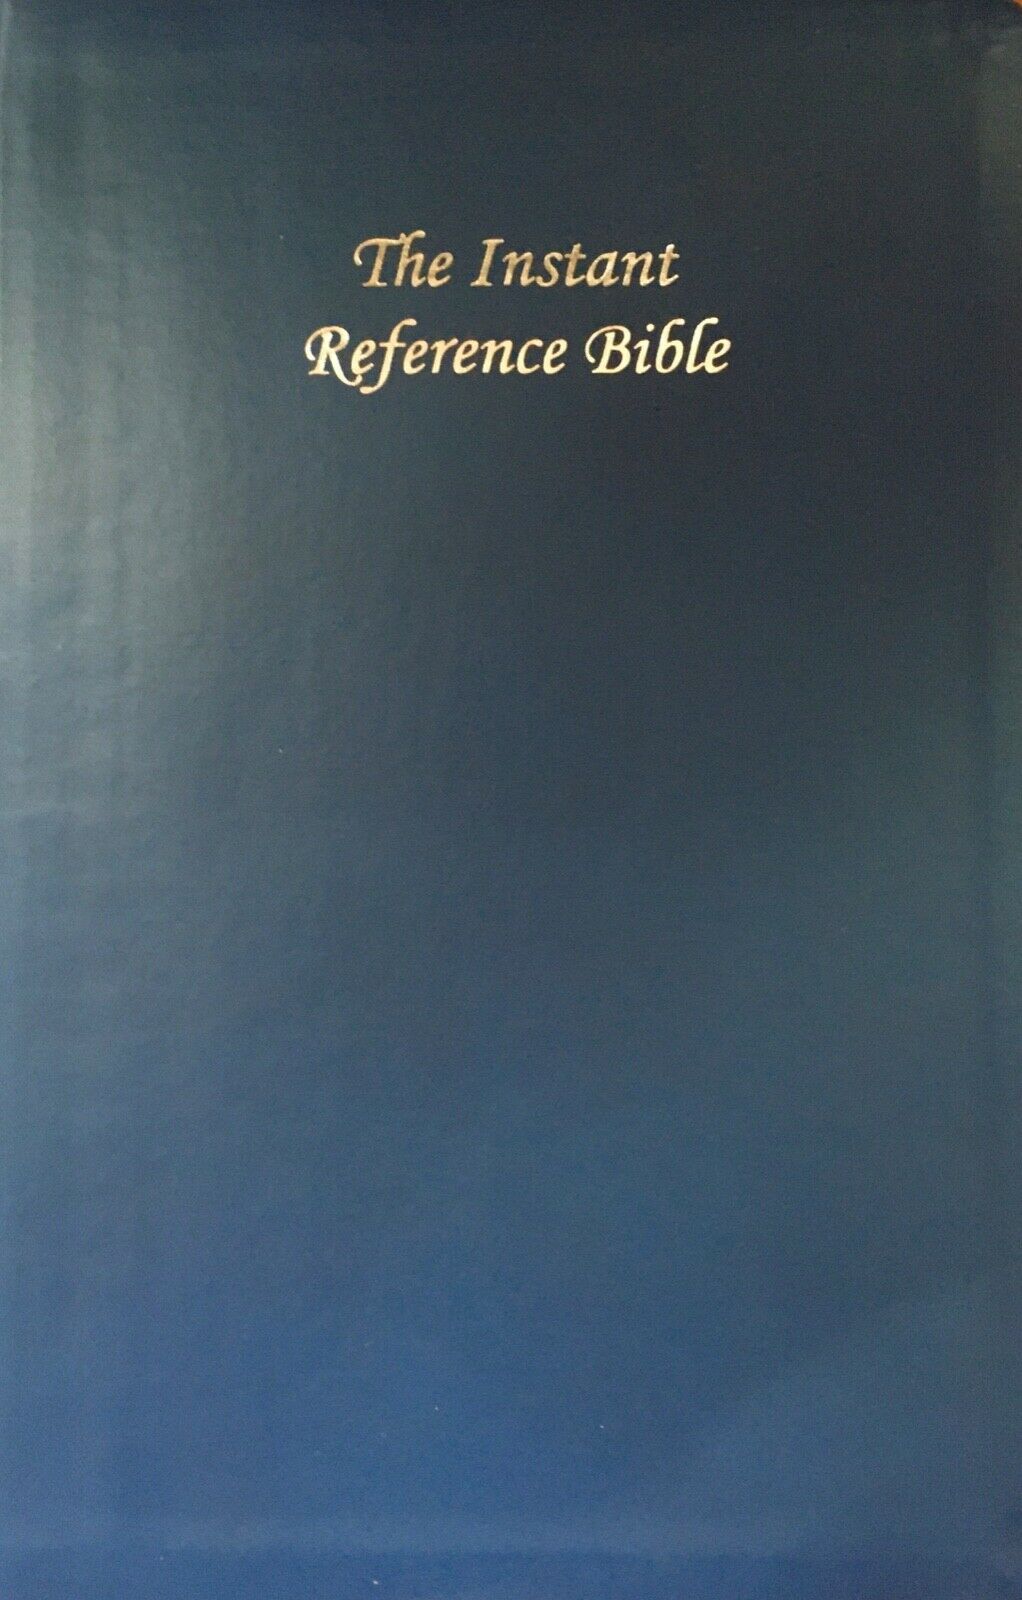 New Edition Instant Reference Study Bible (by Dr Gaddy) Sale